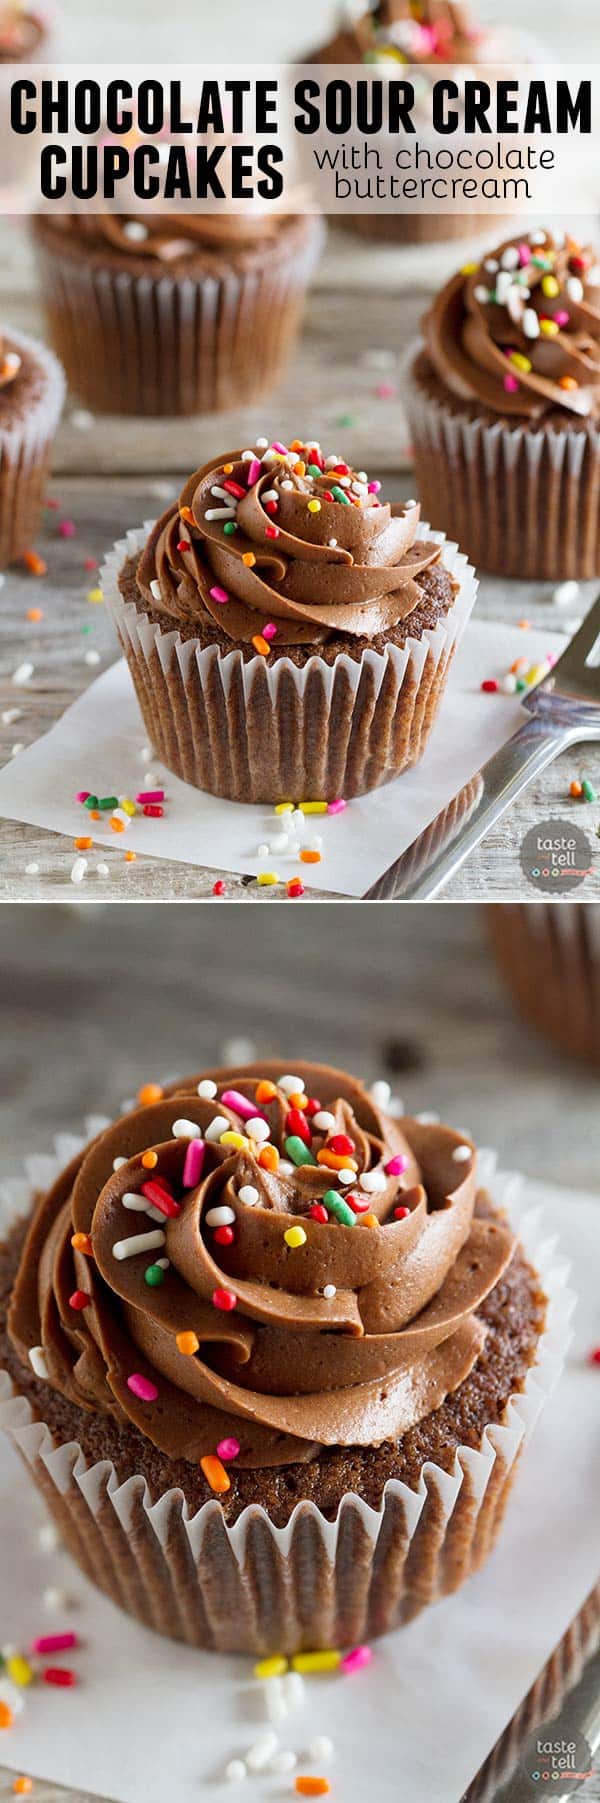 A chocolate lover’s dream, these rich and moist chocolate sour cream cupcakes are covered with a smooth and creamy chocolate buttercream. This will become your go-to chocolate cupcake recipe!